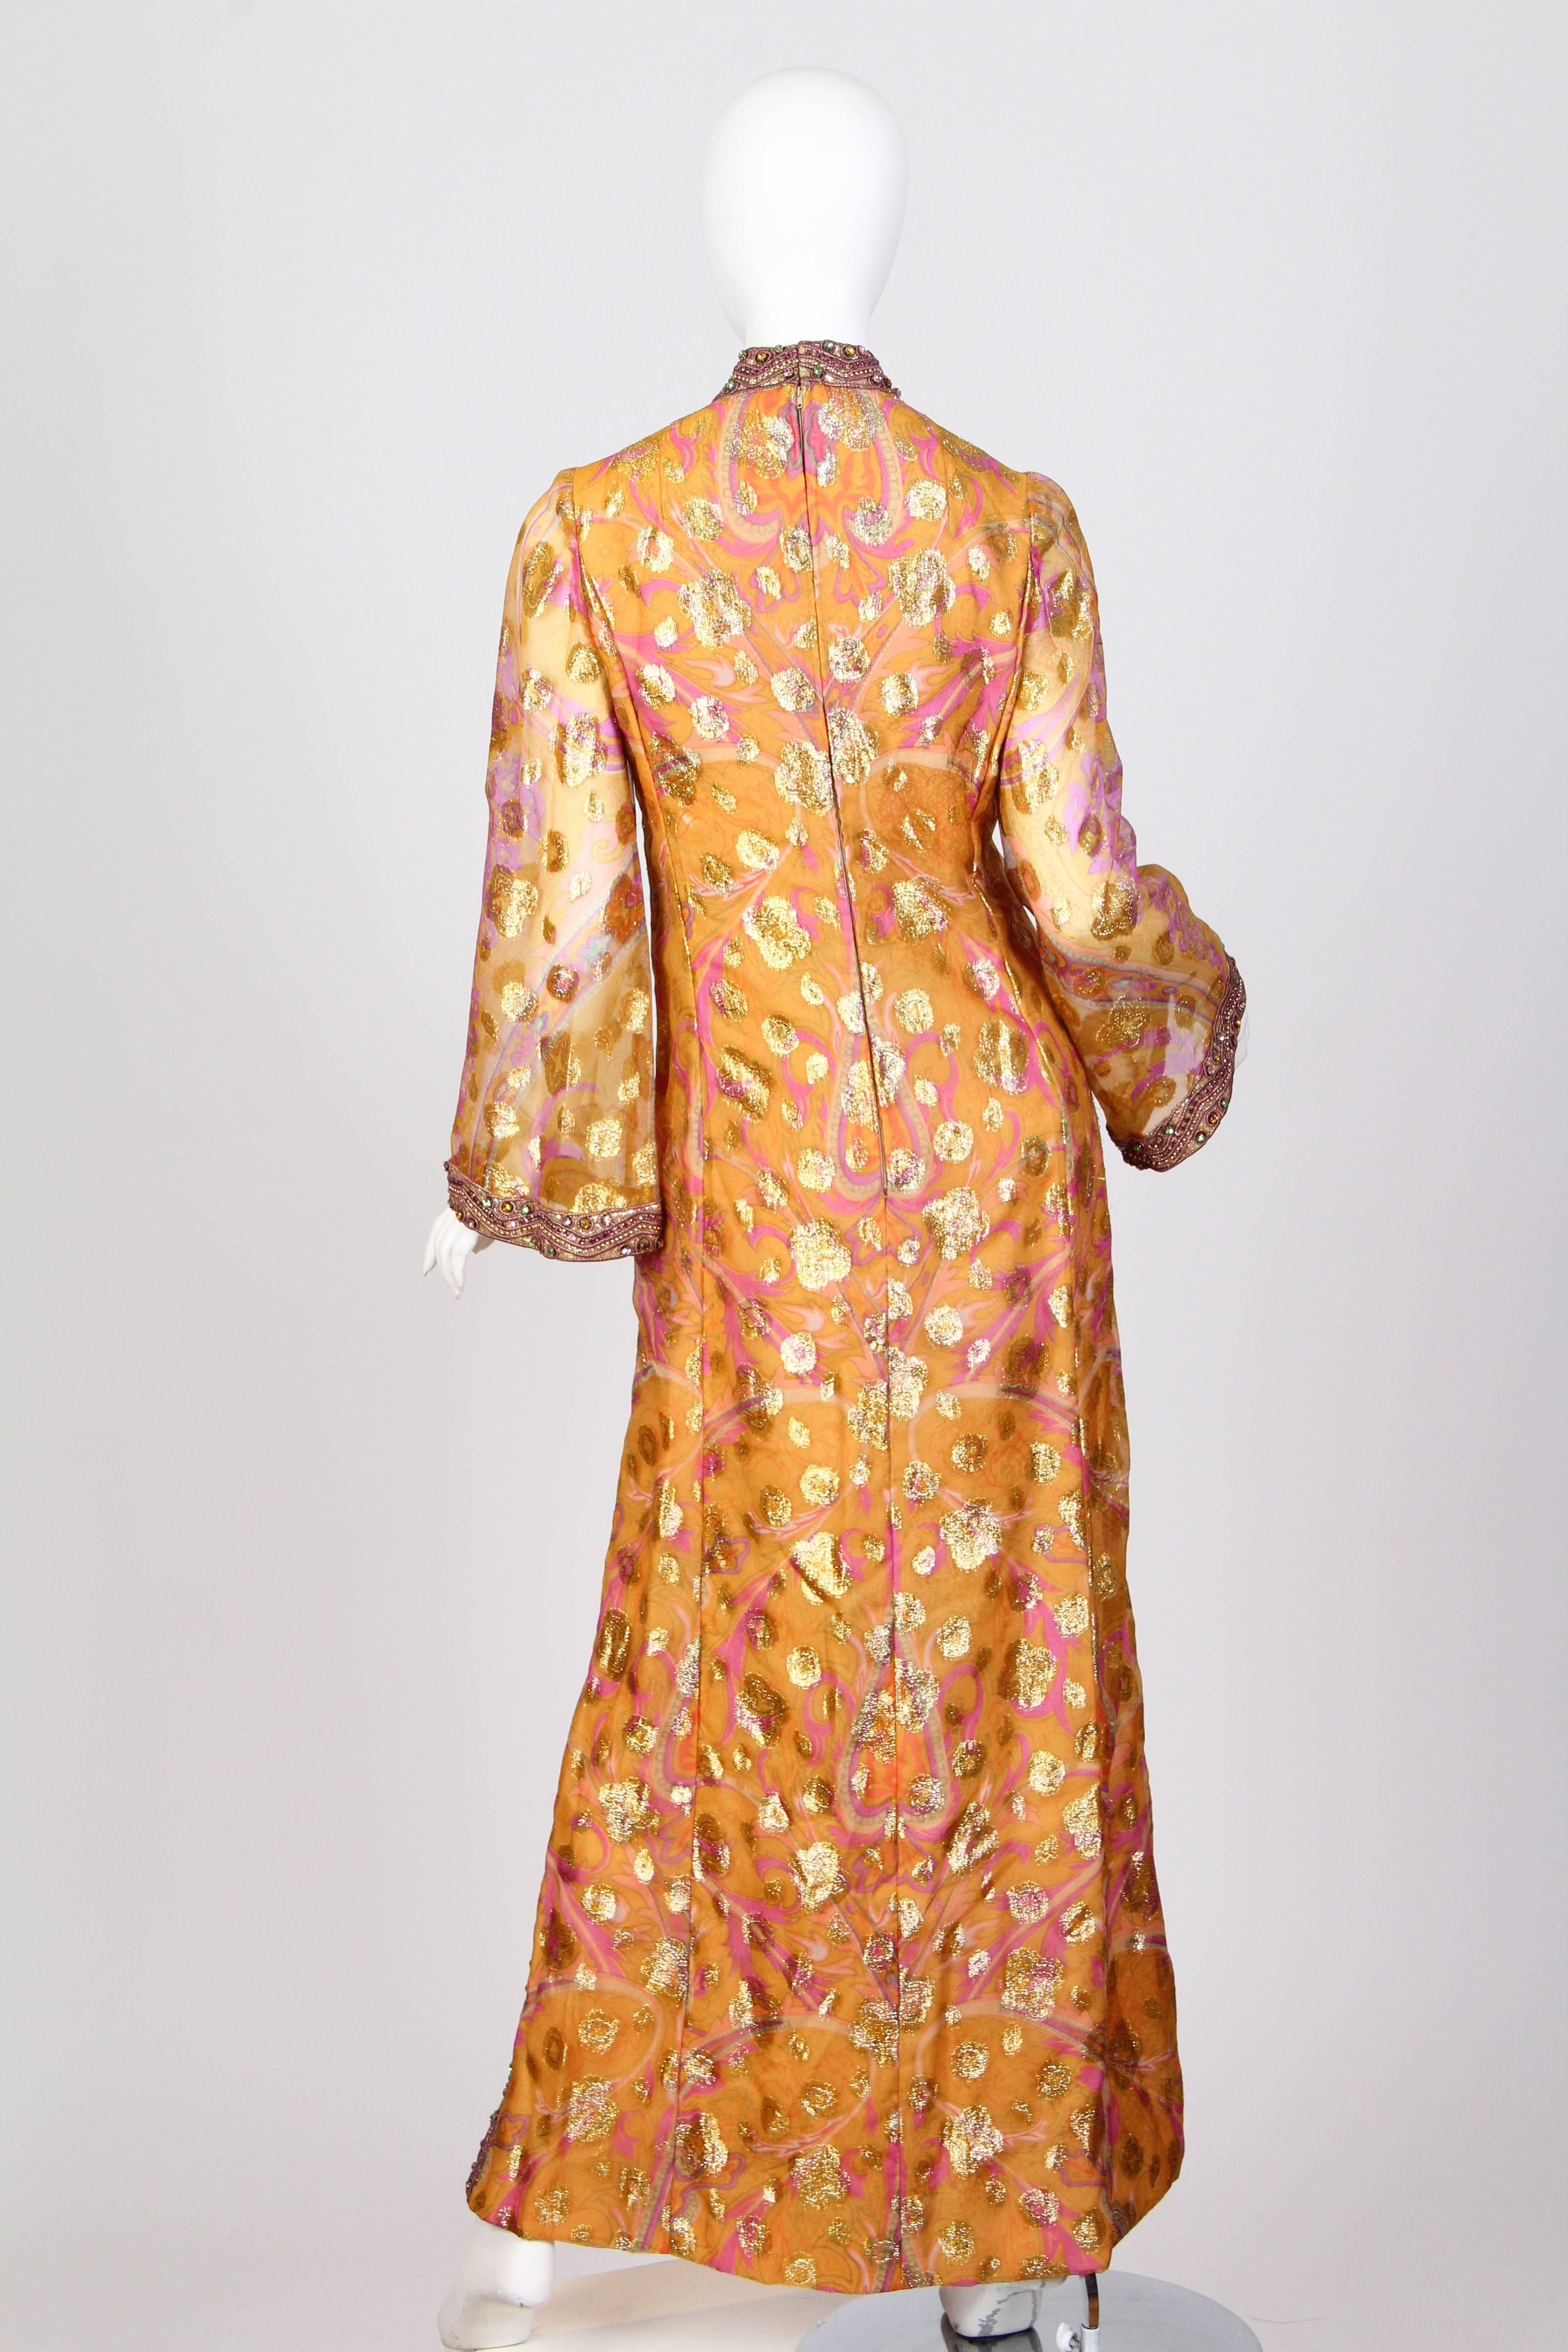 Women's 1960s Luxe Bohemian Dress with Crystals